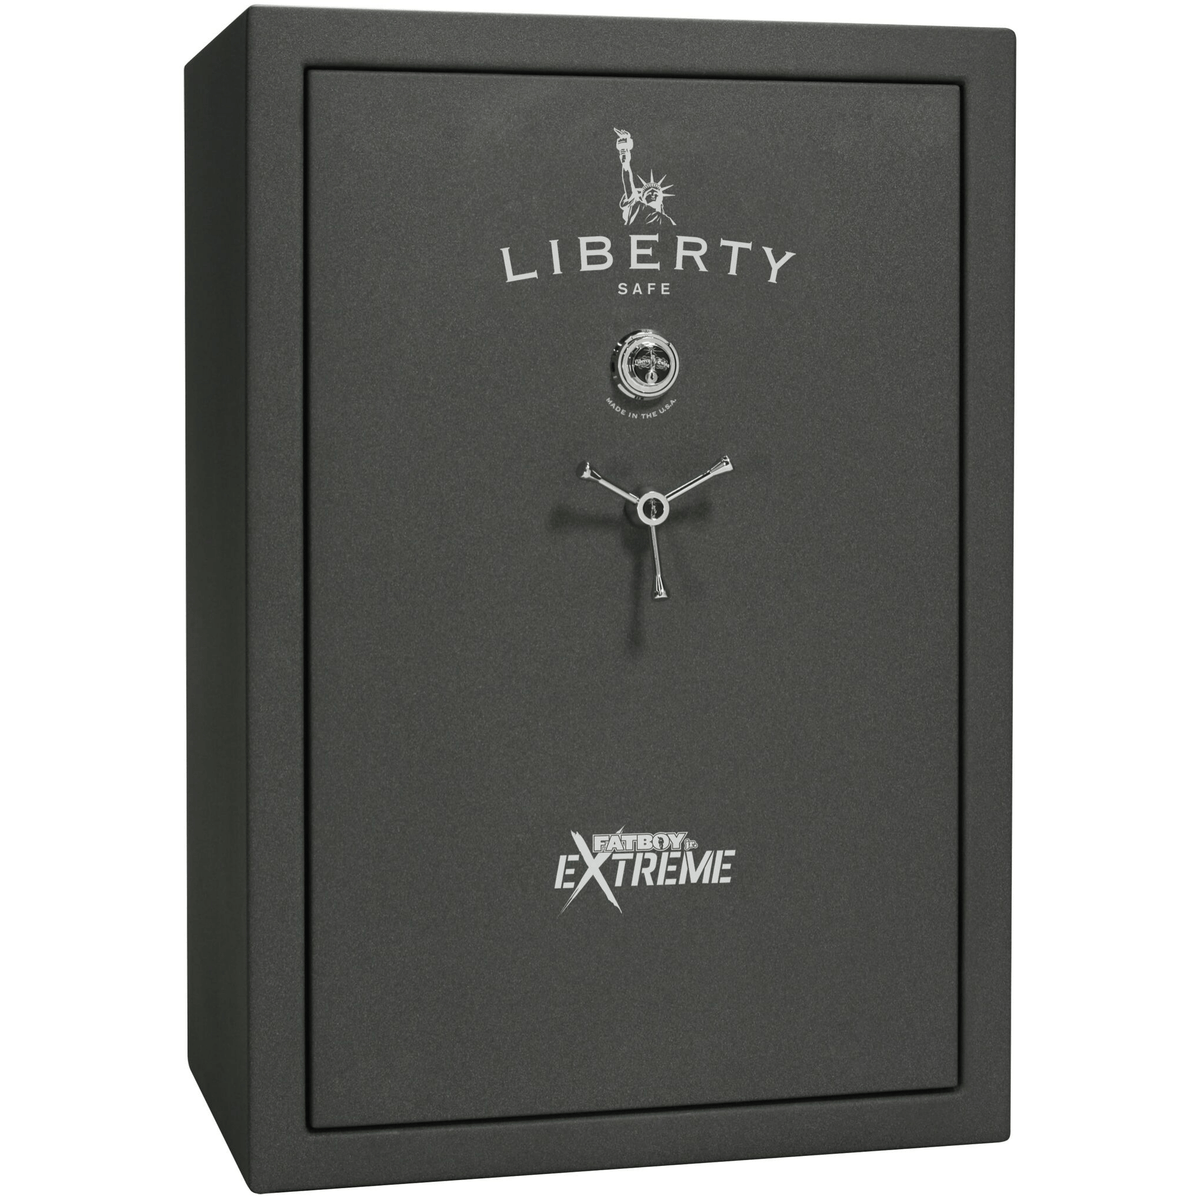 Fatboy Junior Extreme Safe in Textured Granite with Chrome Mechanical Lock.